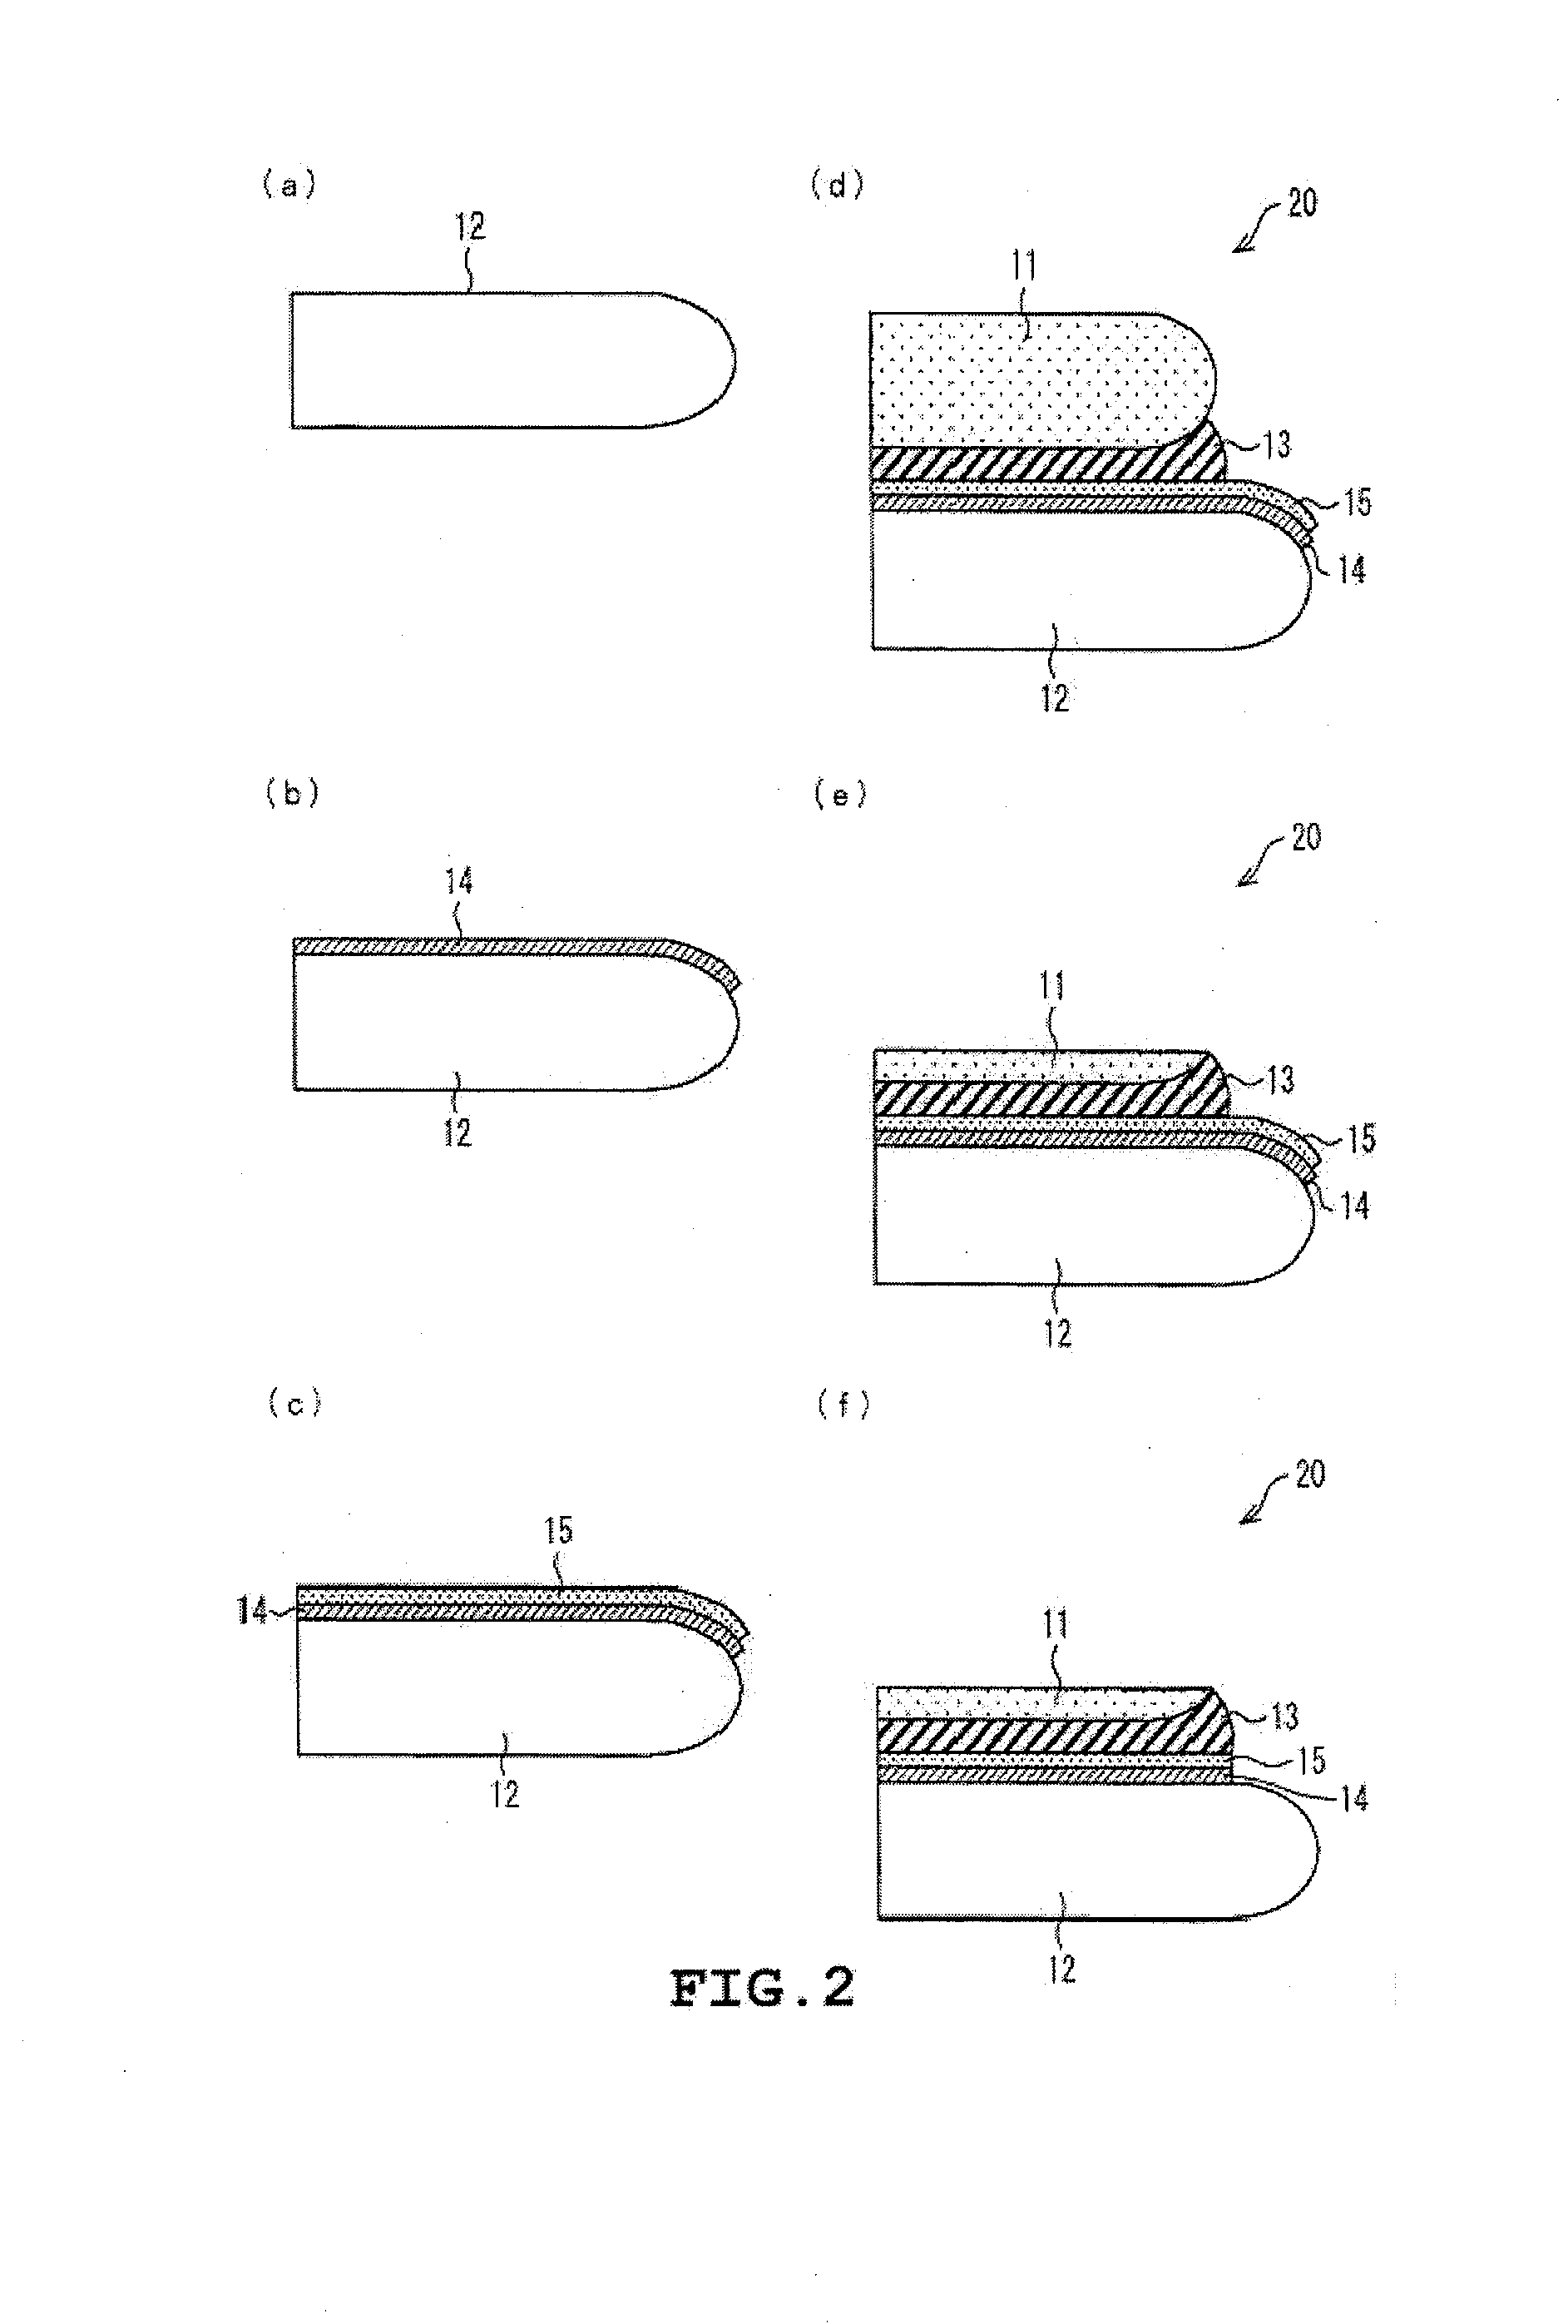 Method for forming laminate